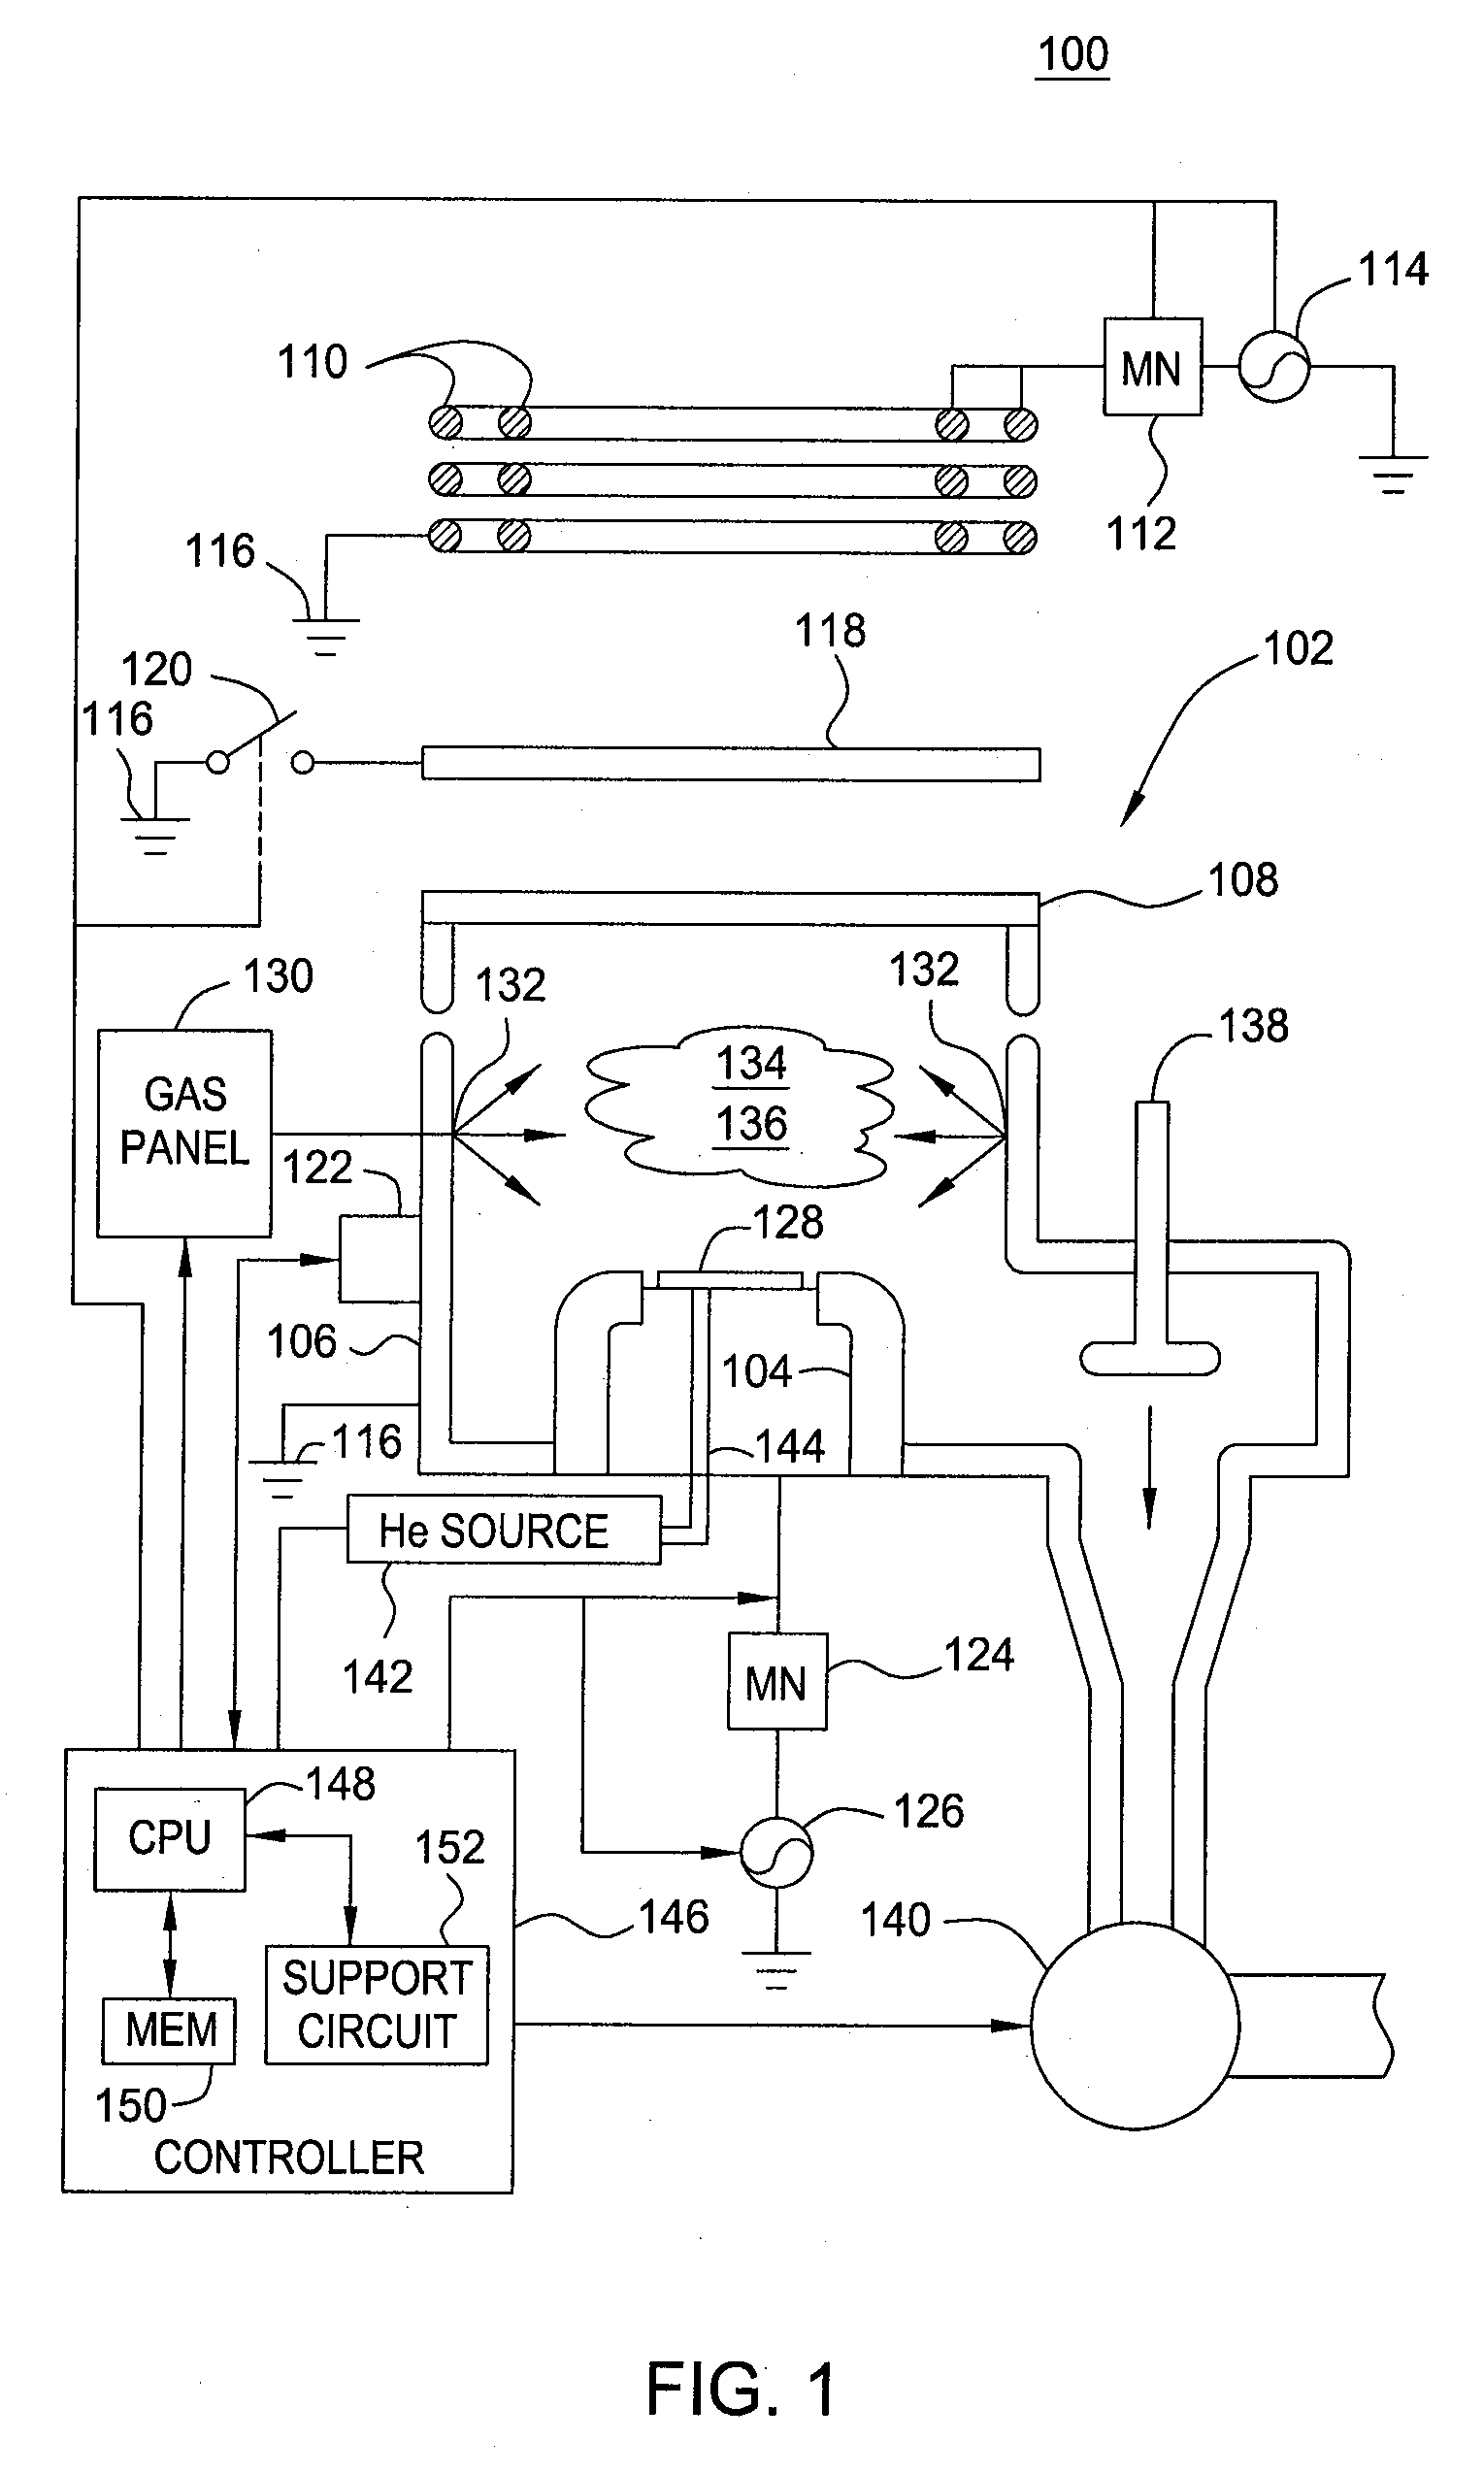 Device that enables plasma ignition and complete faraday shielding of capacitive coupling for an inductively-coupled plasma